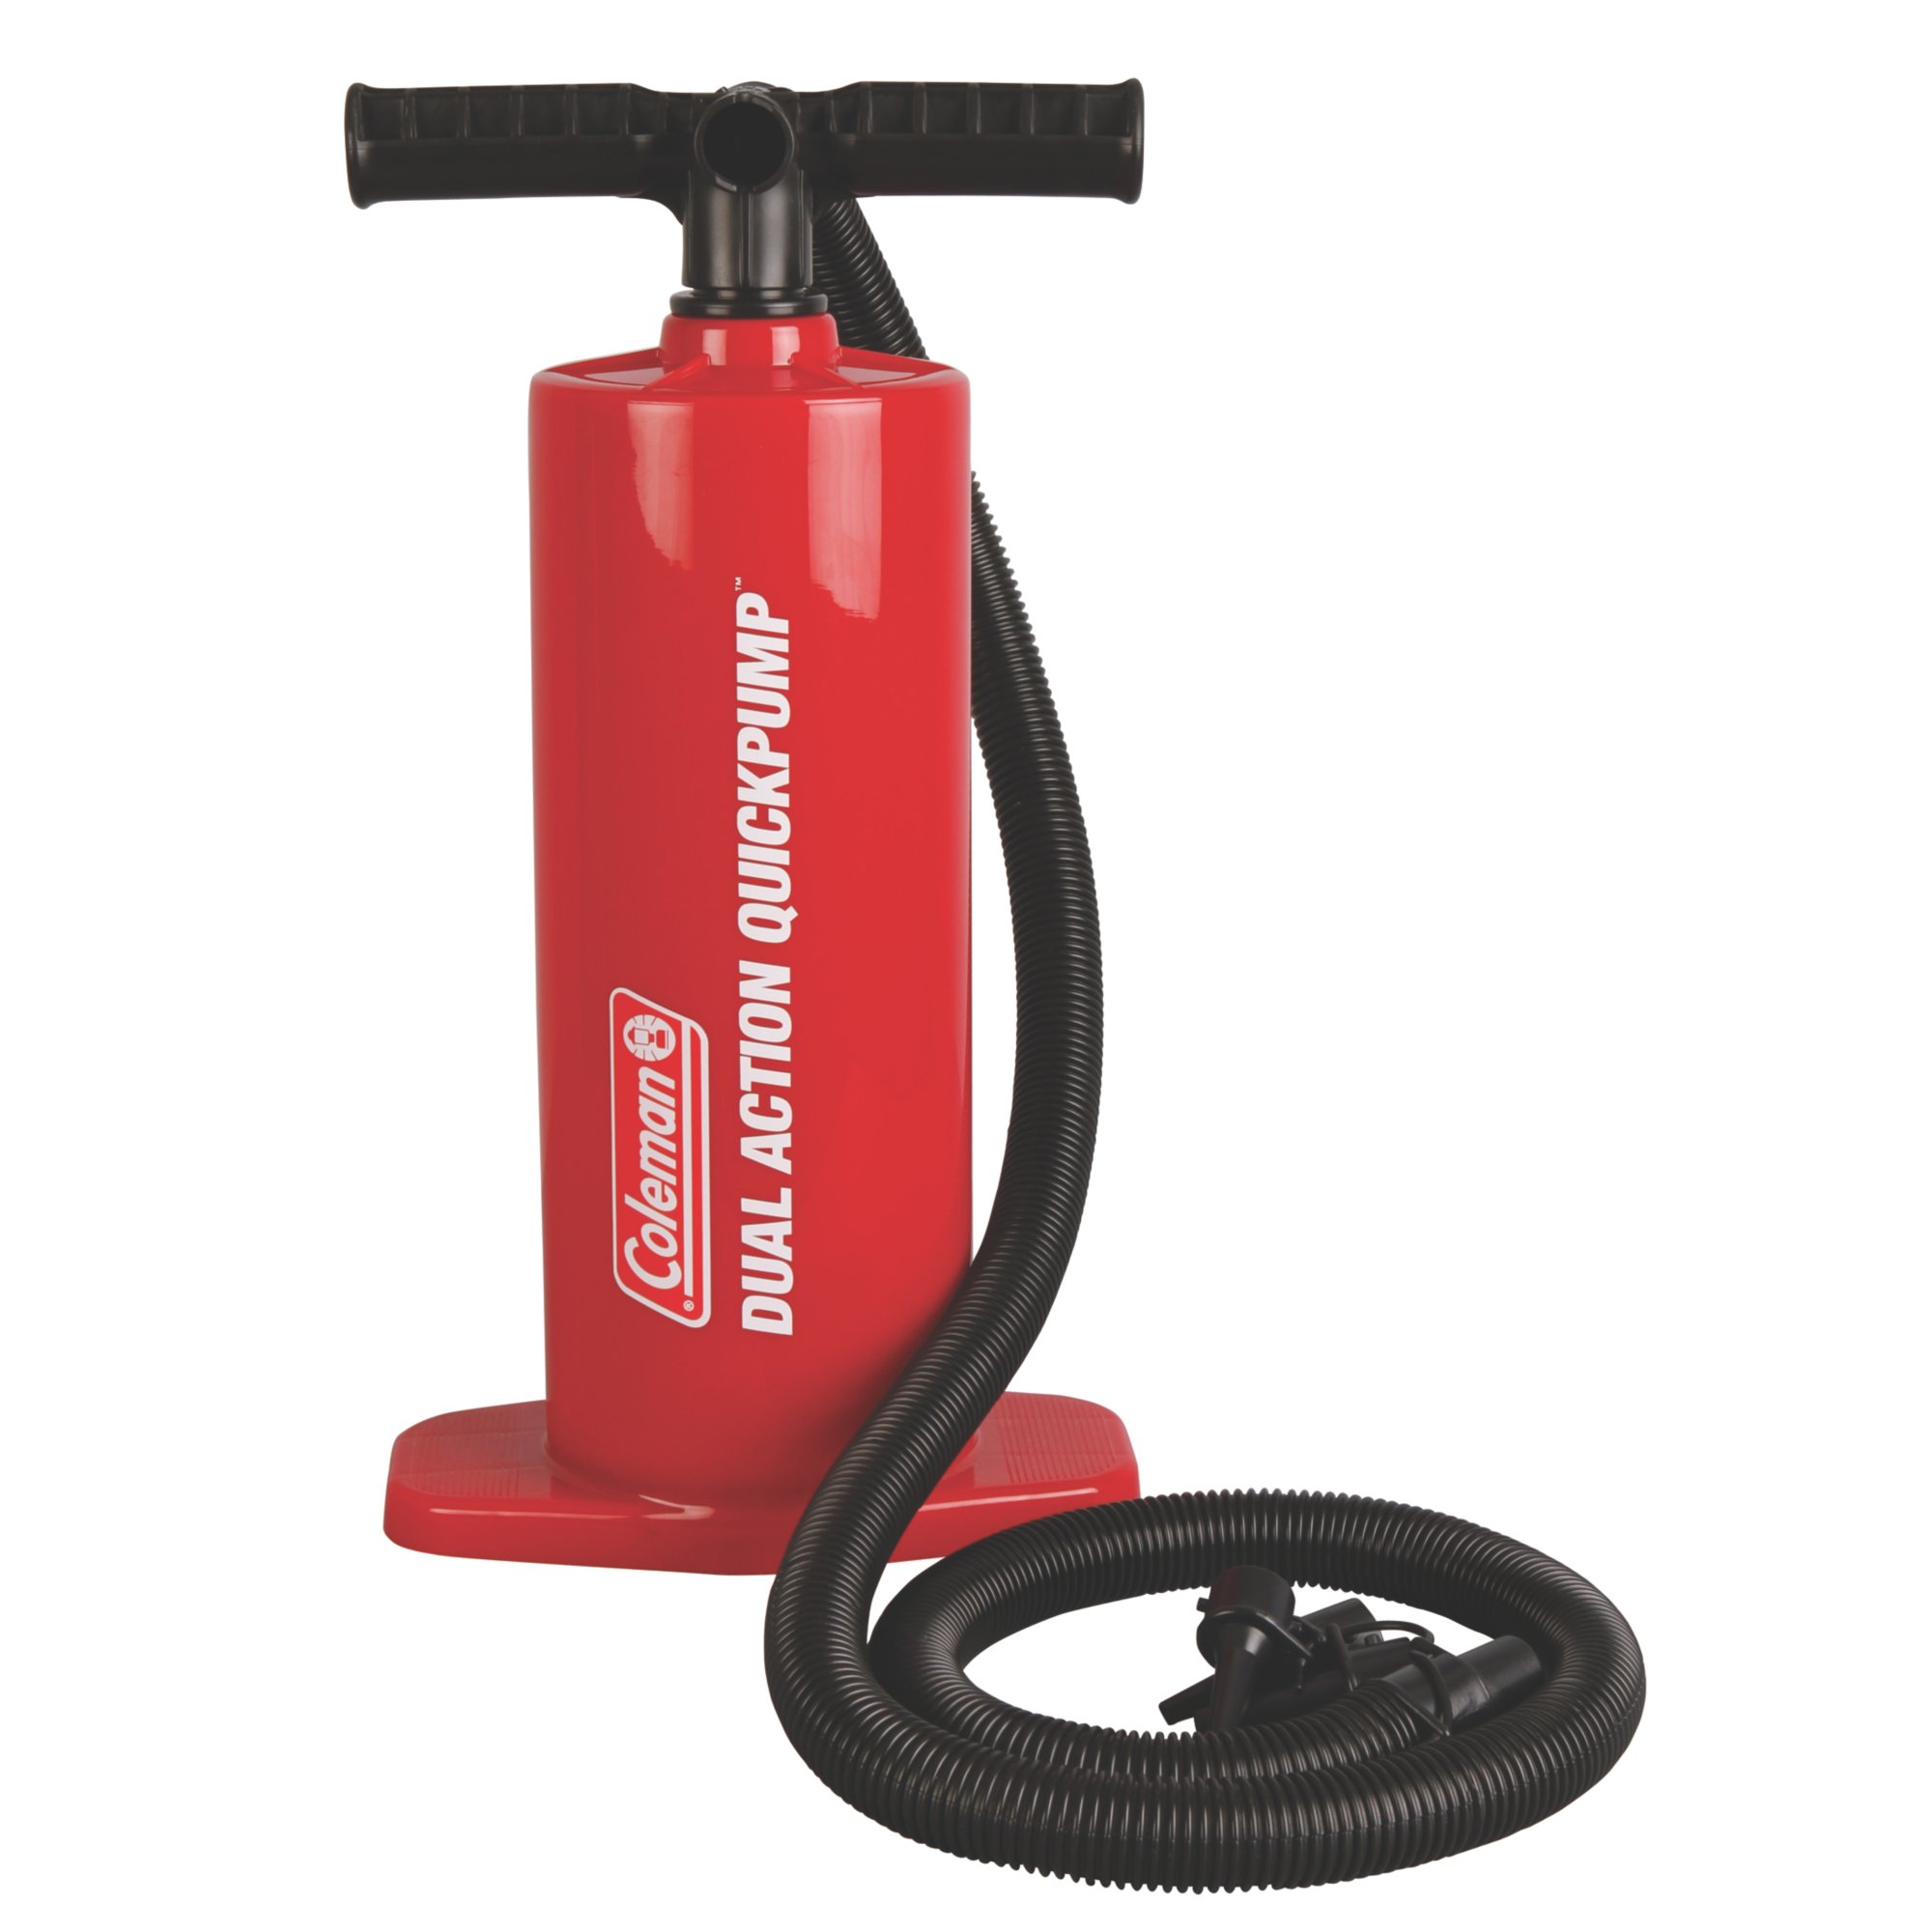 Double Action High Volume Hand Pump | High Volume Hand Pump for Medium &  Large Sized Inflatables